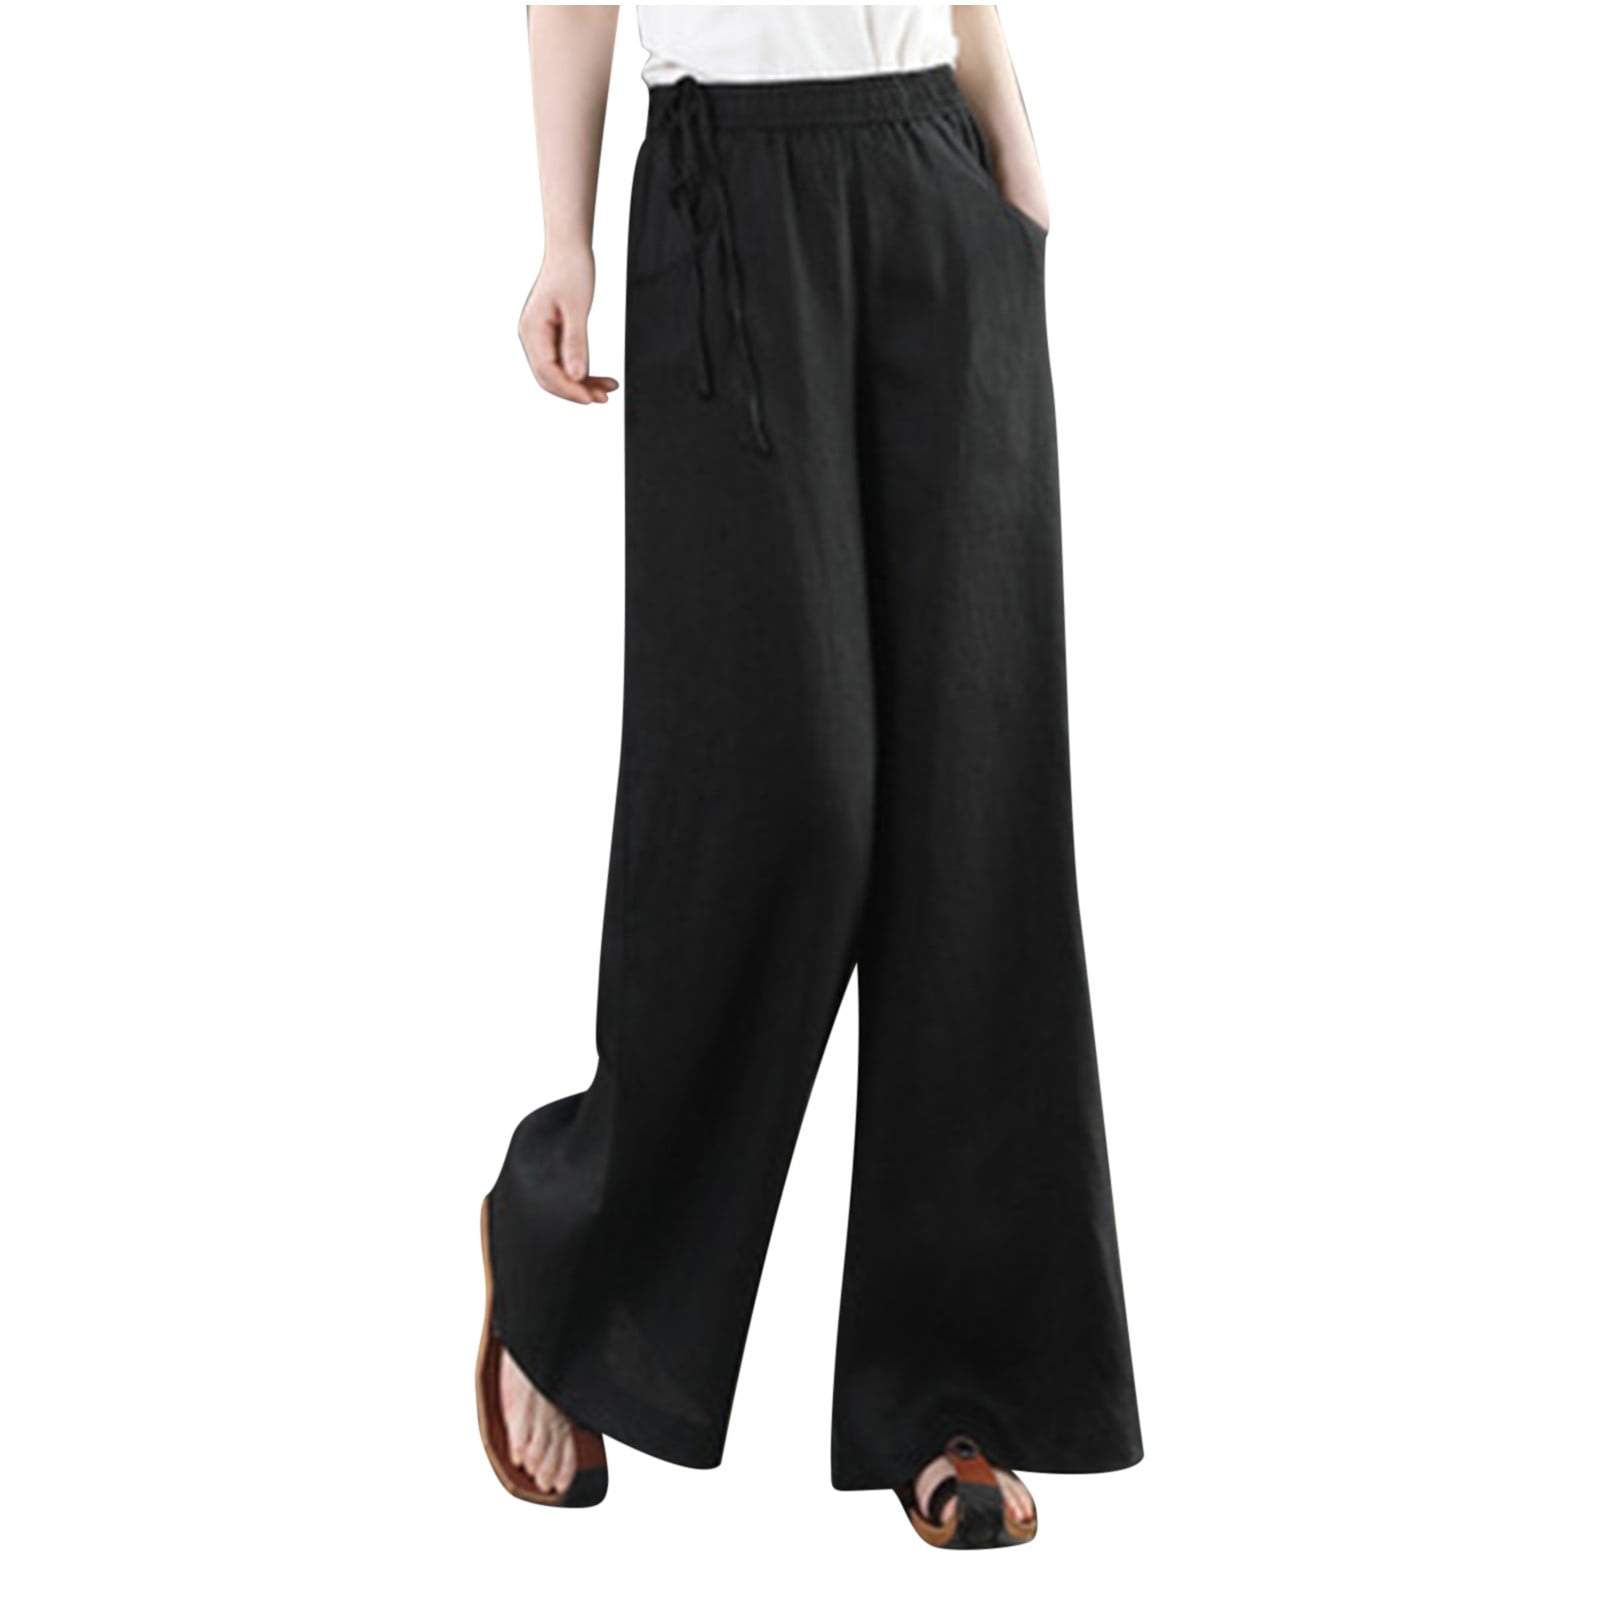 Womens Lounge Pants Cotton Linen Lightweight Wide Leg Pants for Women  Casual Loose Fitting Solid Slacks Trousers (X-Large, Black)